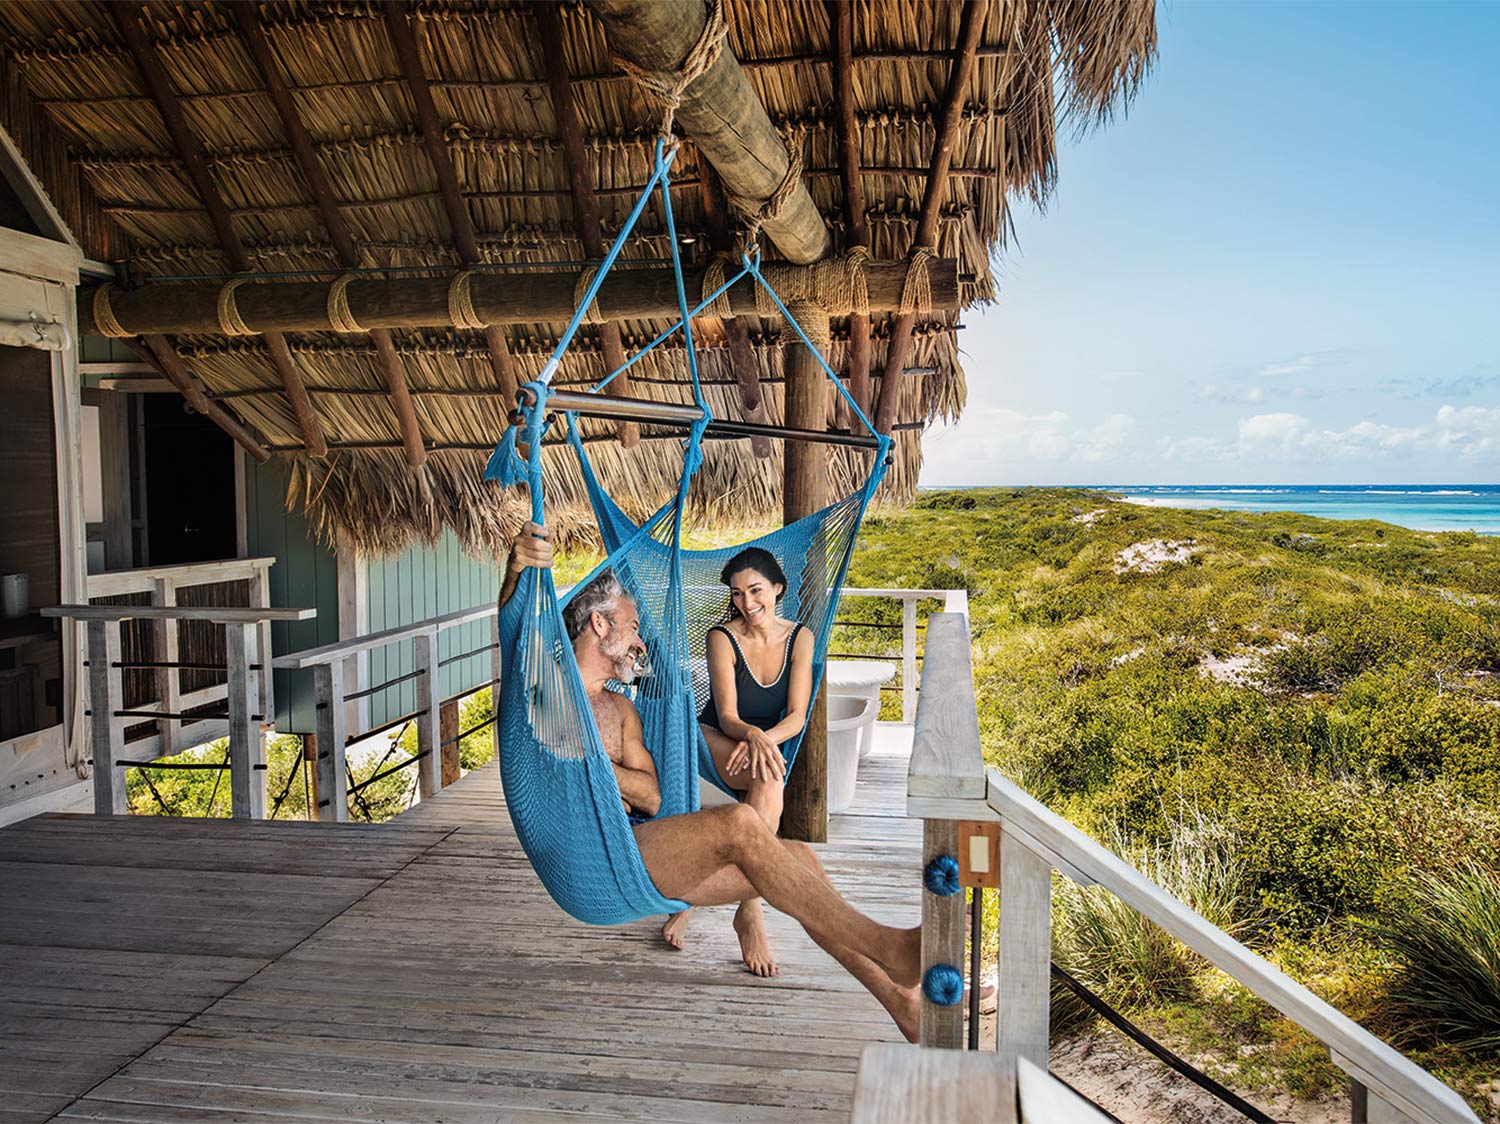 Two people sit in hammocks at a beach resort of the island of Anegada.